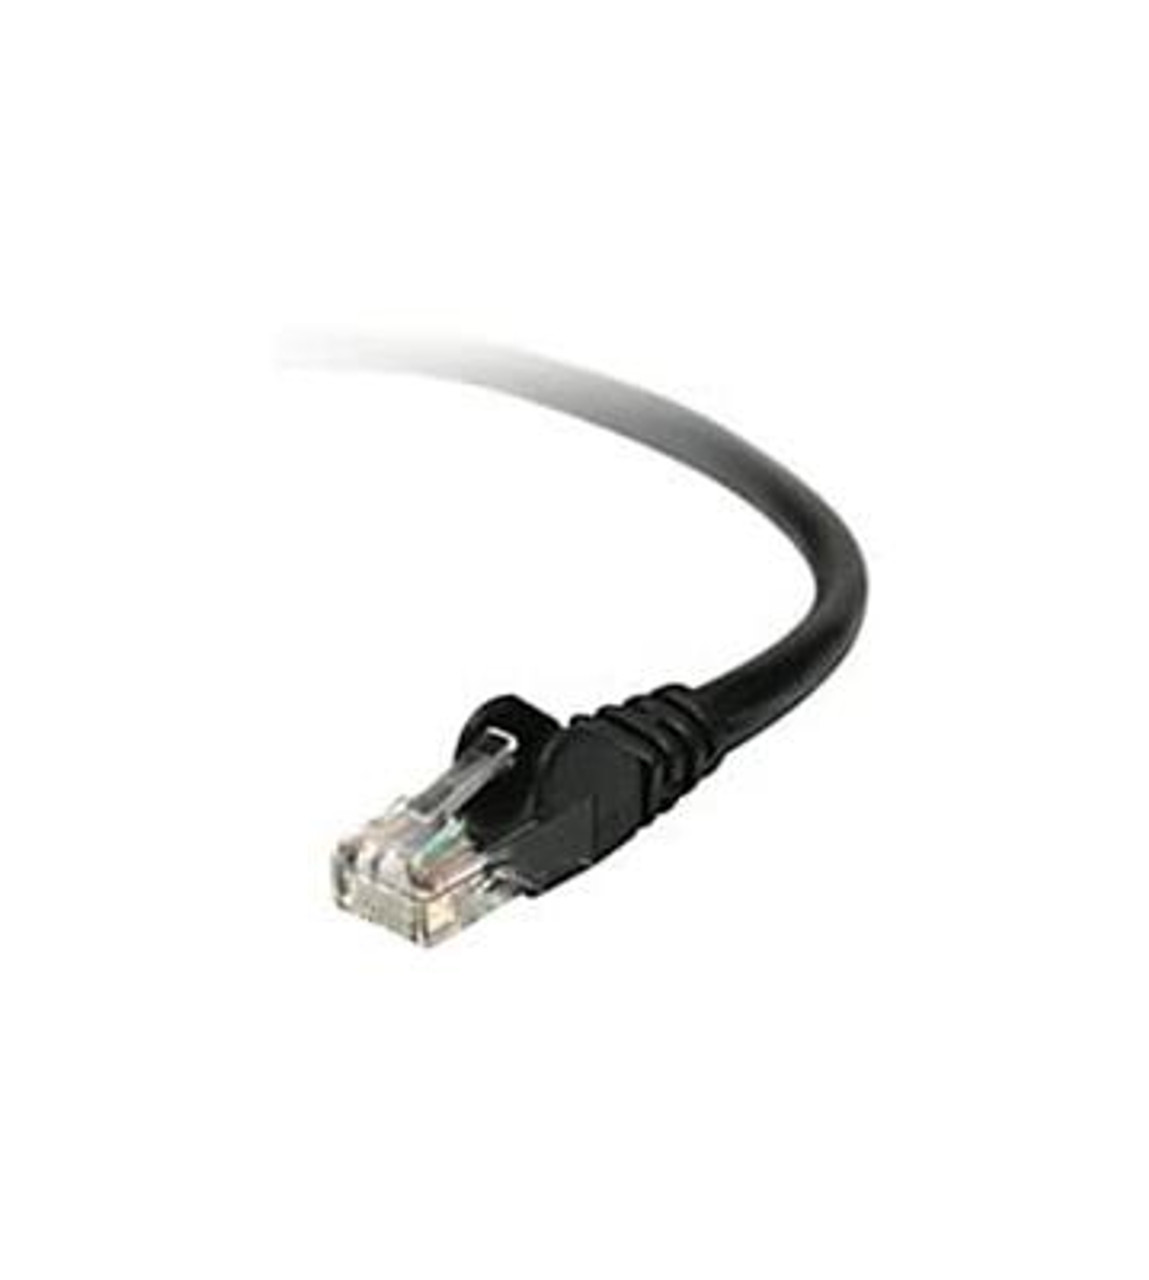 PCF5-14BKS-SN Belkin Cat.5e Patch Cable Category 5e for Network Device 14 ft 1 x RJ-45 Male Network 1 x RJ-45 Male Network Black (Refurbished)